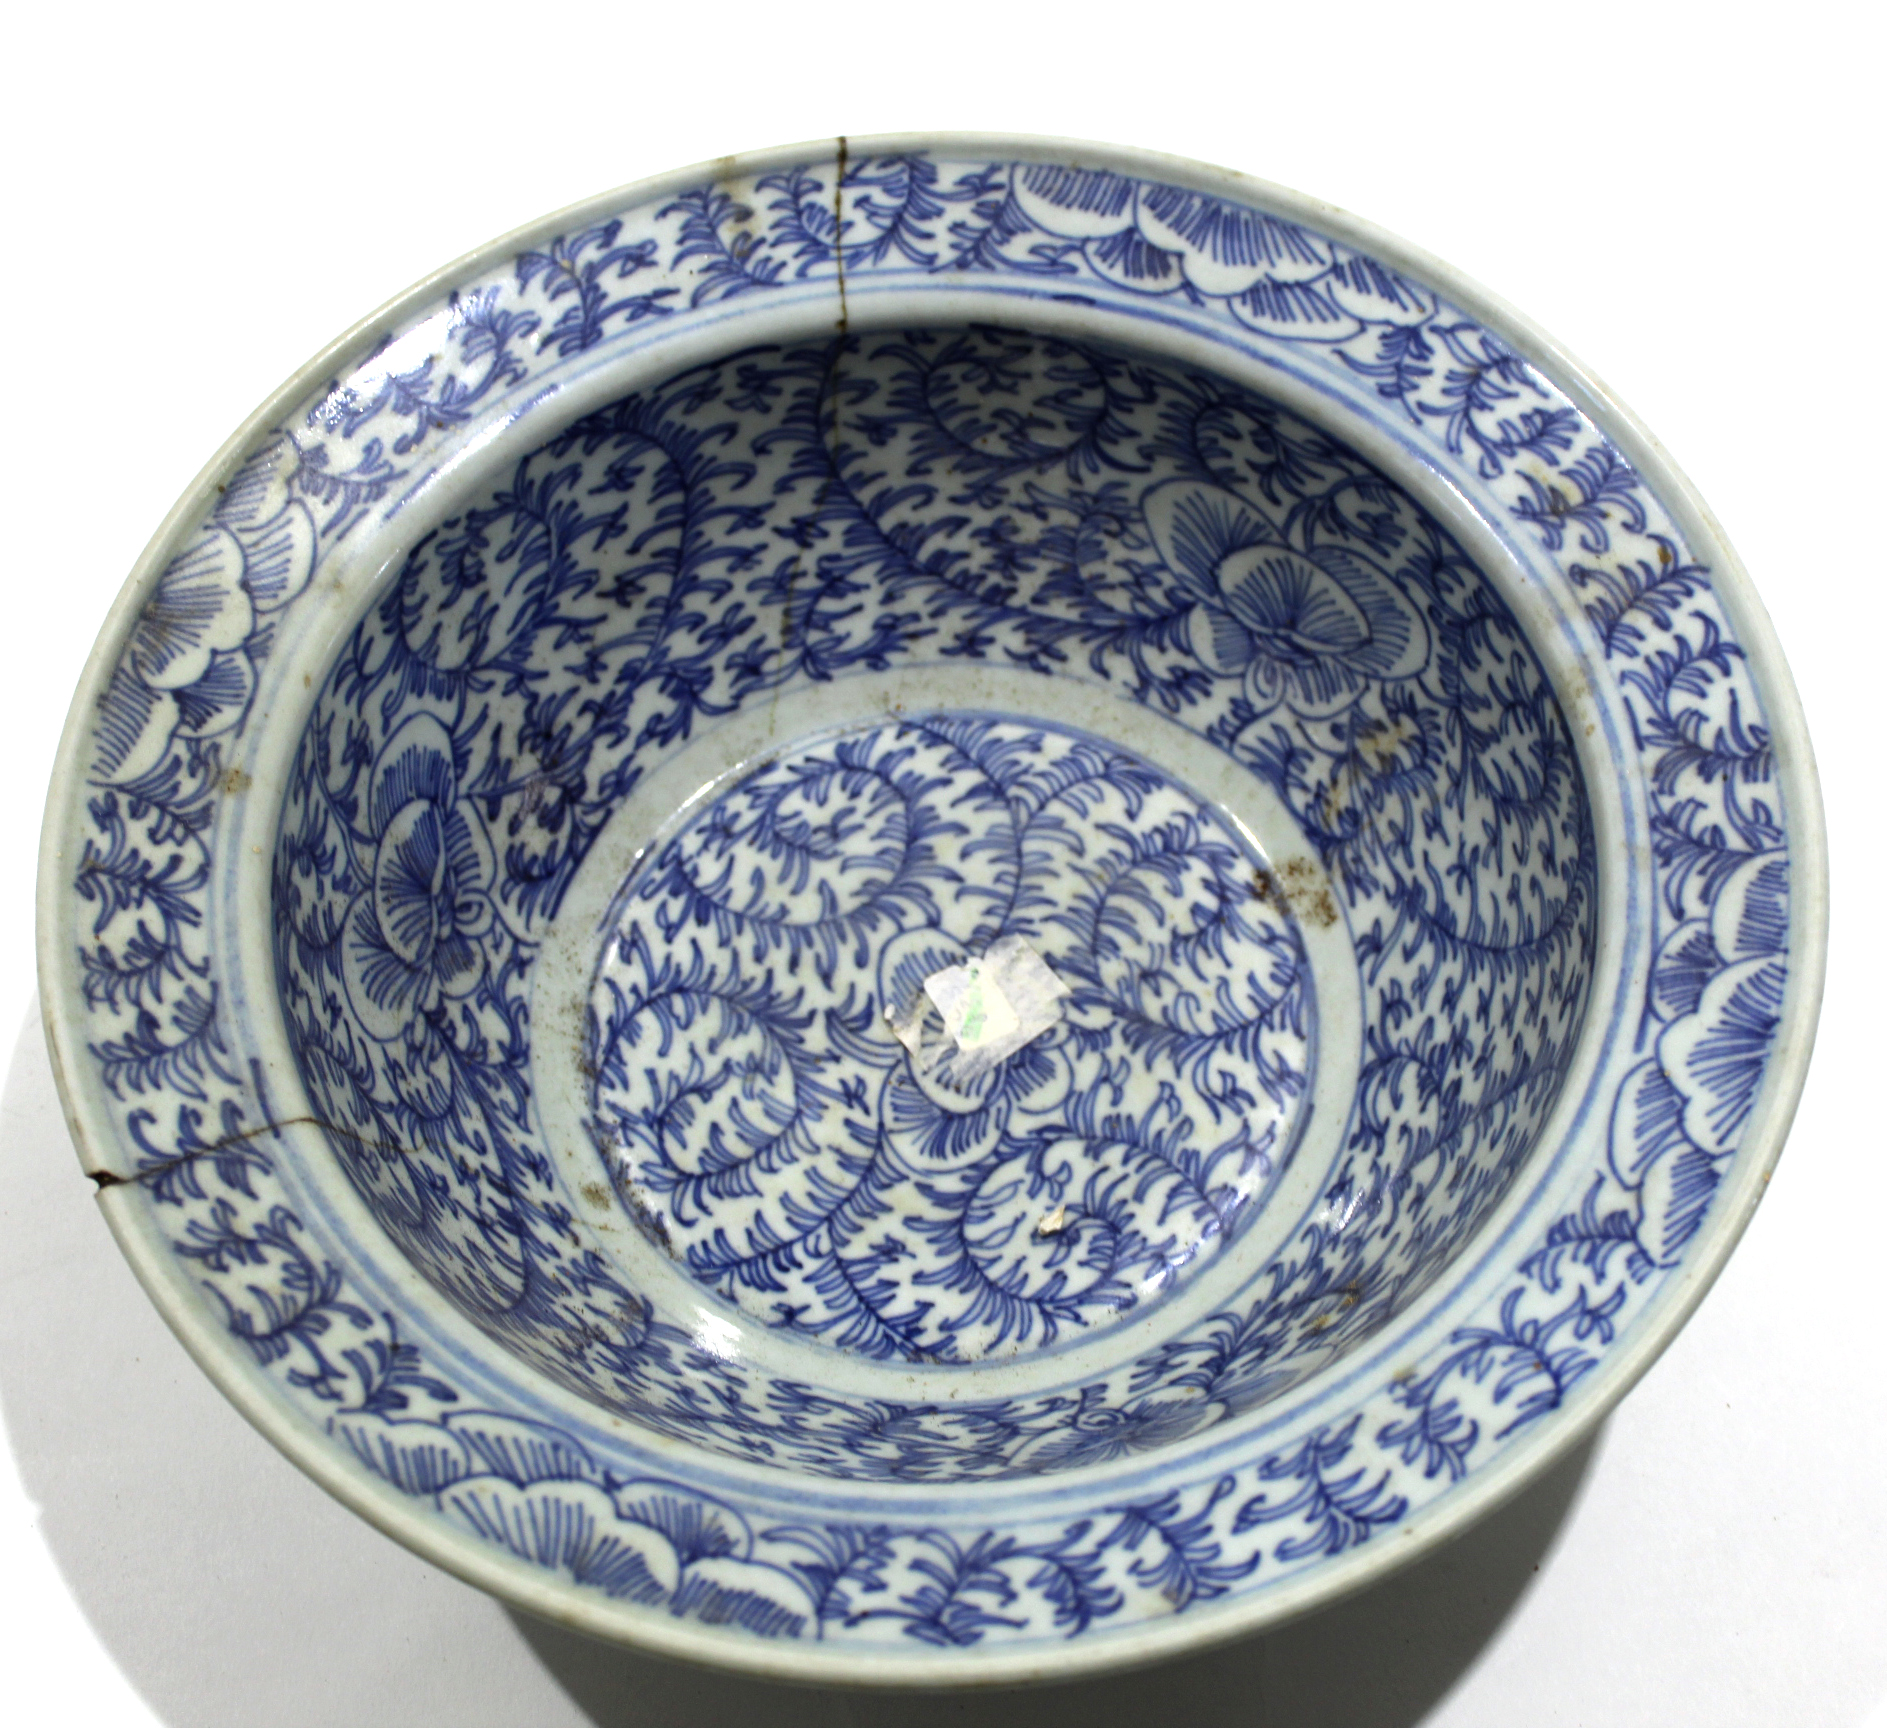 Ming style bowl, decorated in typical fashion with sale label for Philips Lot No 284 Sale No 1694, - Image 3 of 8